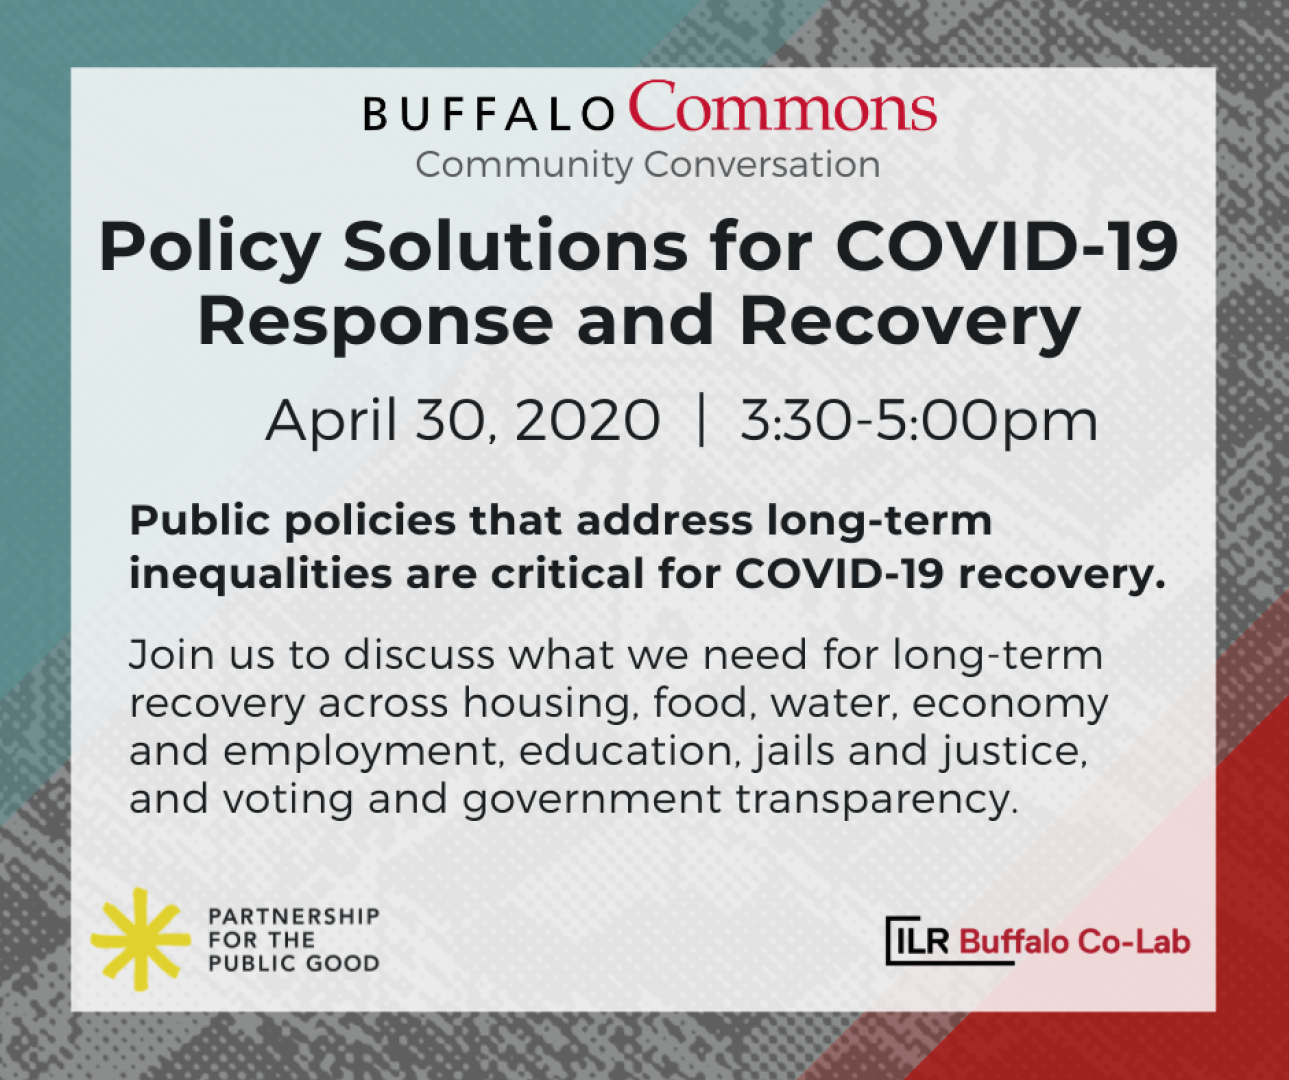 Buffalo Commons Community Conversation: Policy Solutions for COVID-19 Response and Recovery